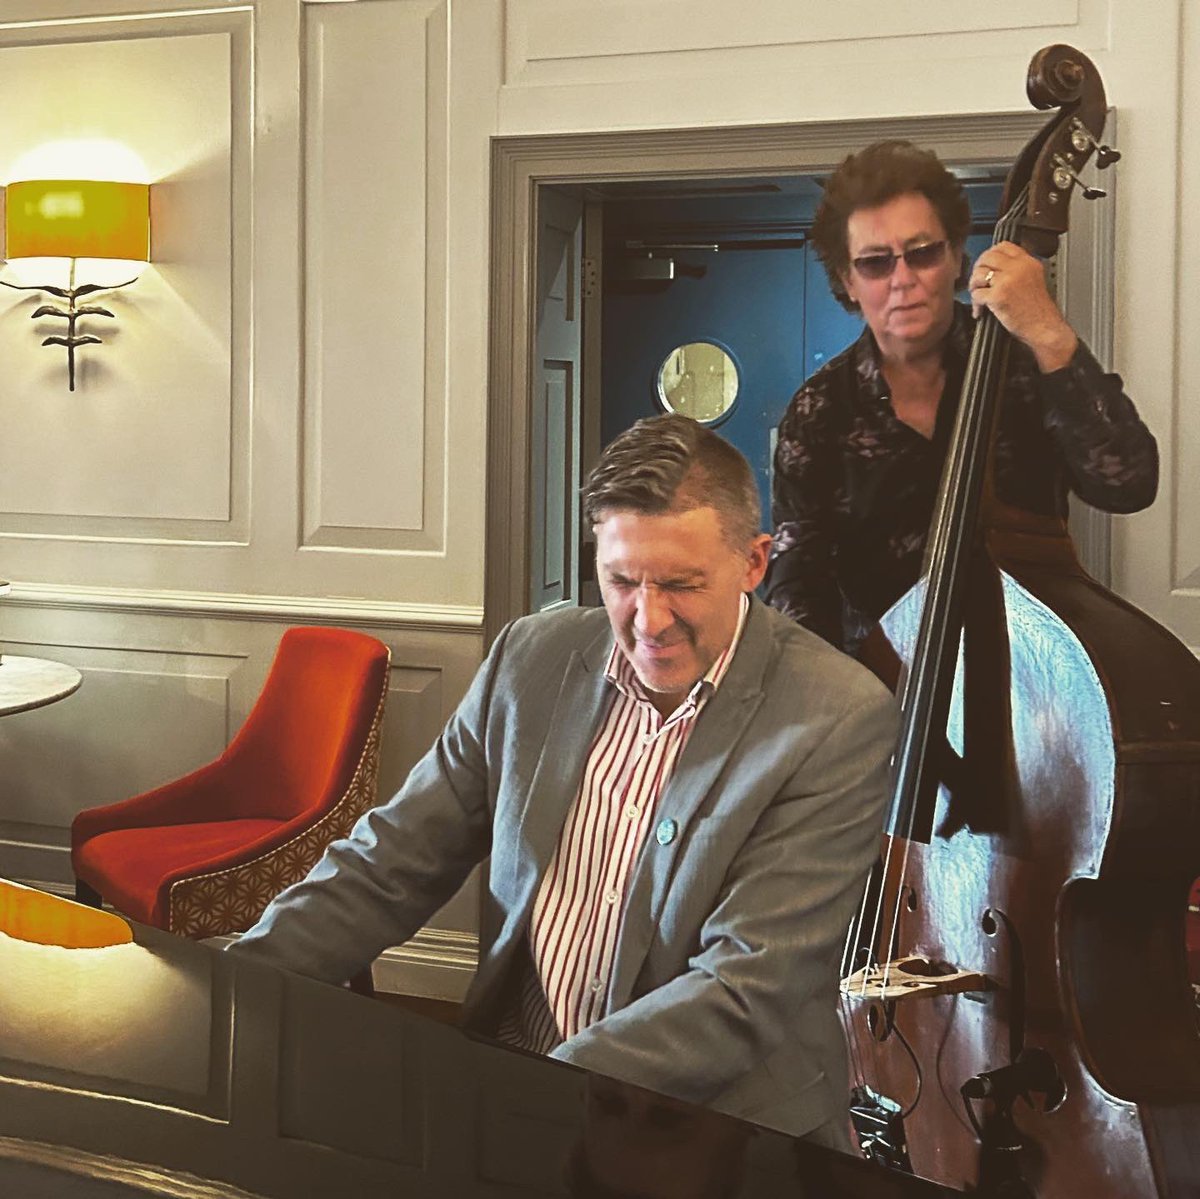 Live #jazz at @GonvilleHotel this weekend in #Cambridge! #Pianojazz with @RobinPjazz and Terry Fri 7-9pm, then #vocaljazz with Robin and @dulciemaymoreno on Sat 6:30-9pm. Free to enjoy in the cocktail lounge! #cocktails #jazz @LoveCambridge_ #whatson #jazzpiano